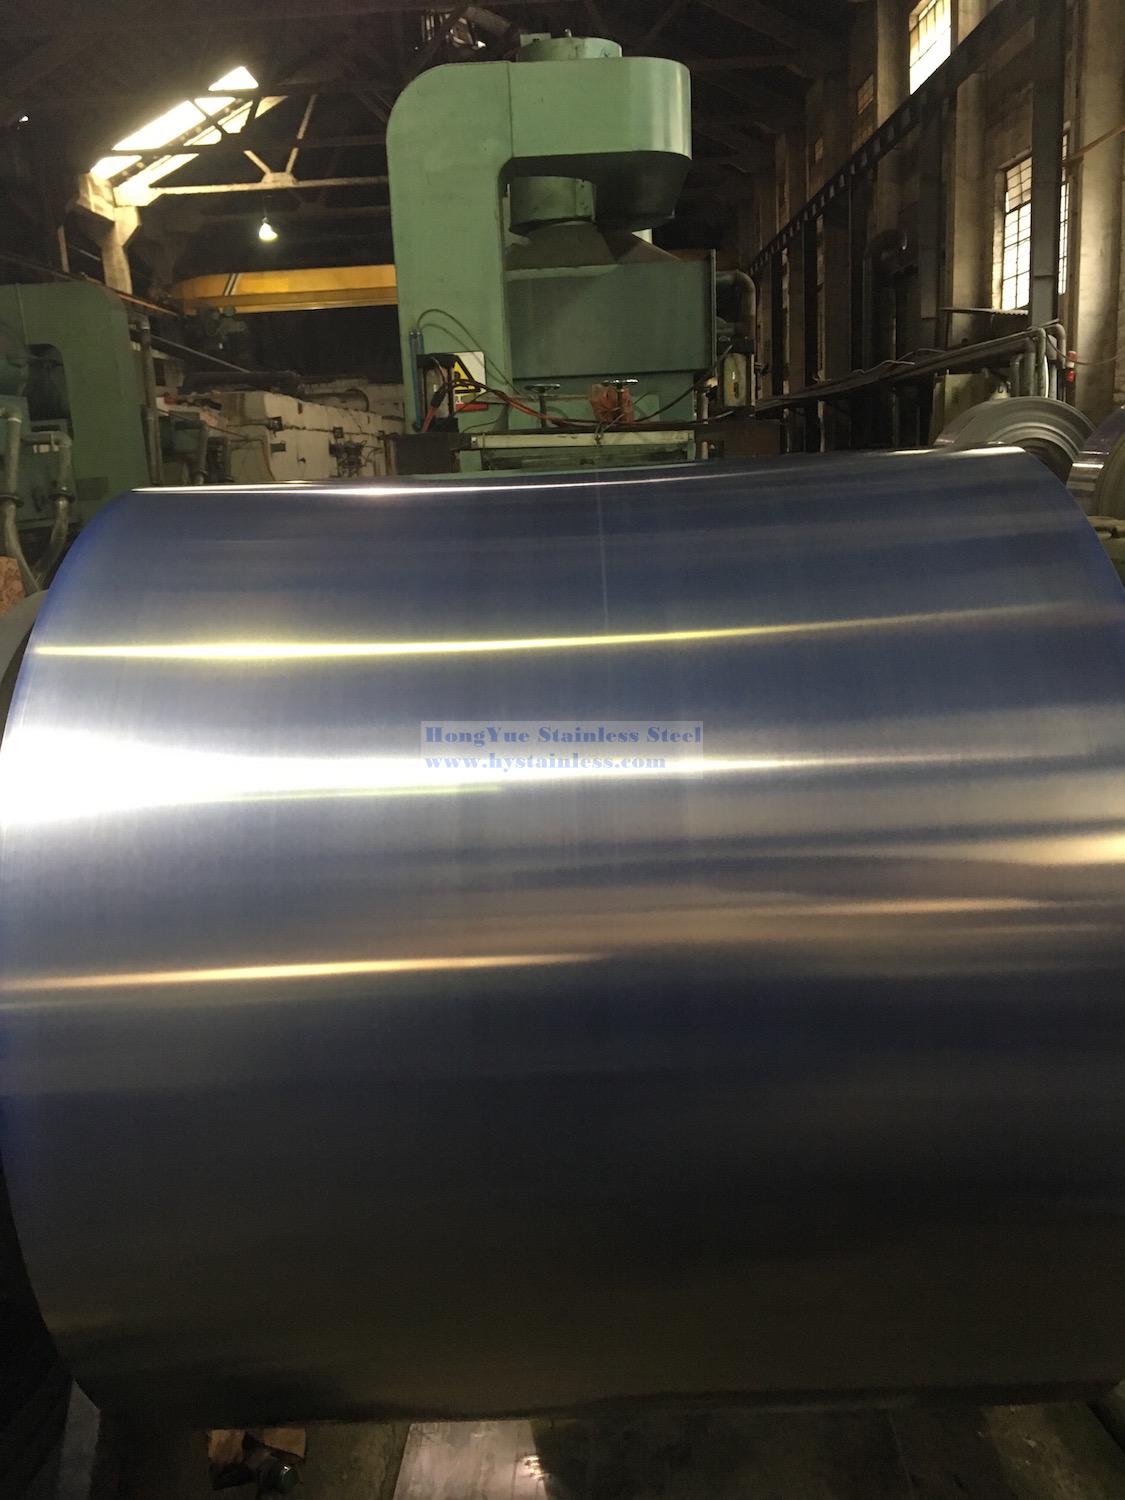 Stainless steel cold rolling factory-<a href=http://www.hystainless.com target='_blank'><a href=http://www.hystainless.com target='_blank'>Hong Yue Stainless Steel</a></a>